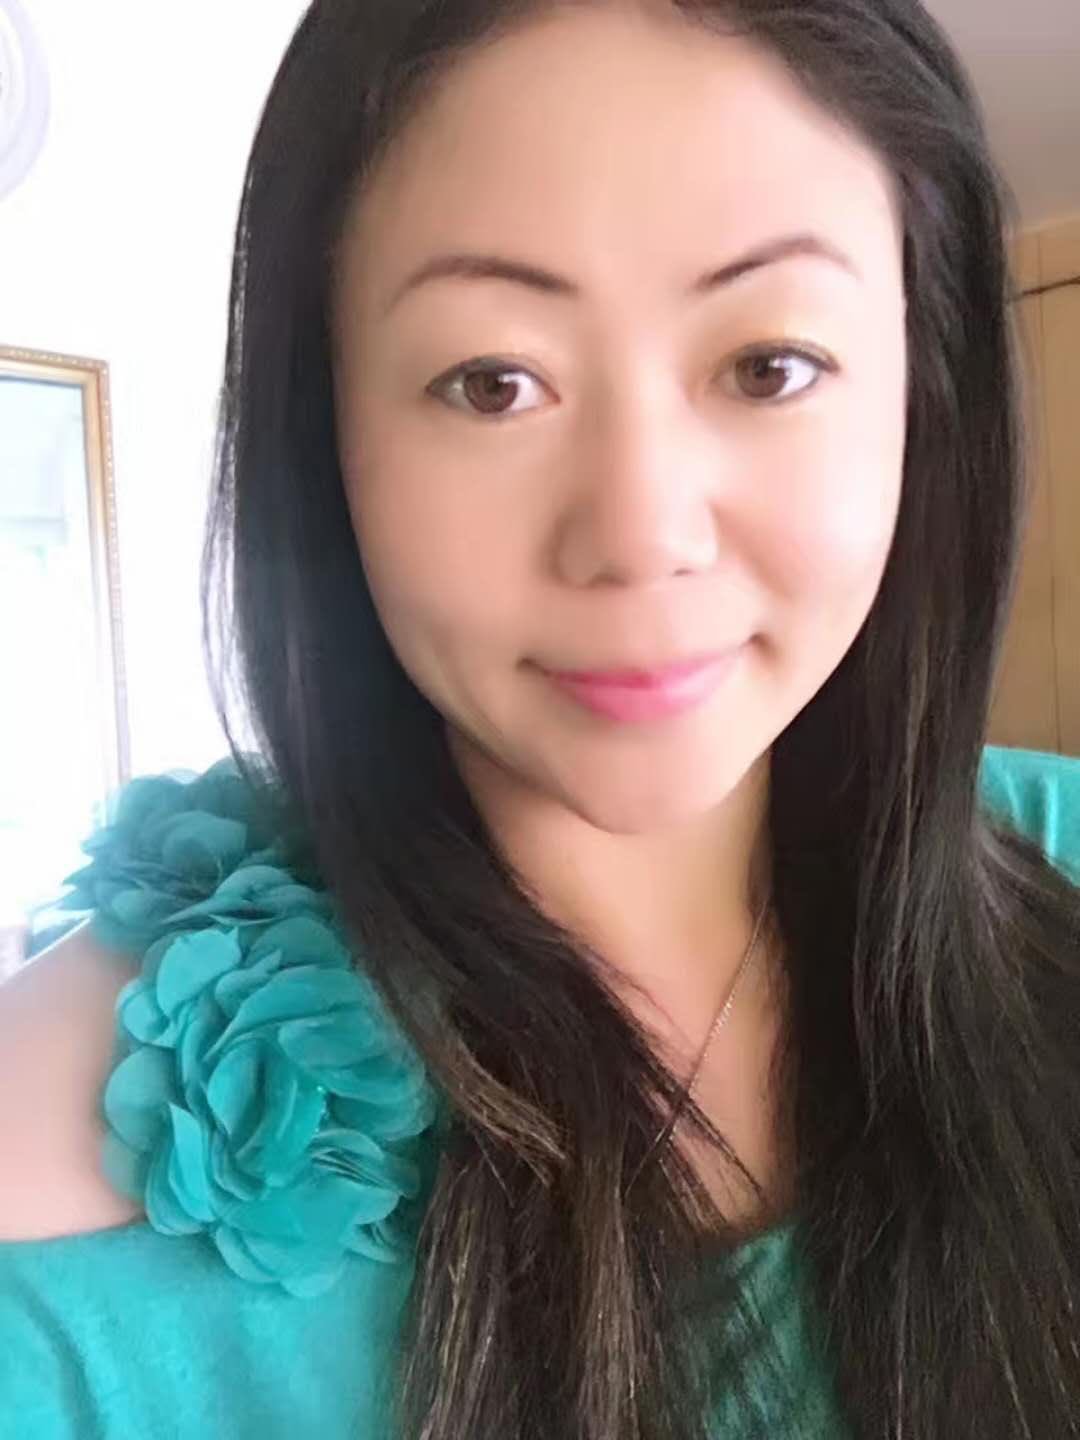 Yang Song either fell or jumped to her death from a fourth-floor balcony in November 2017 during a police raid of the Flushing spa where she worked.